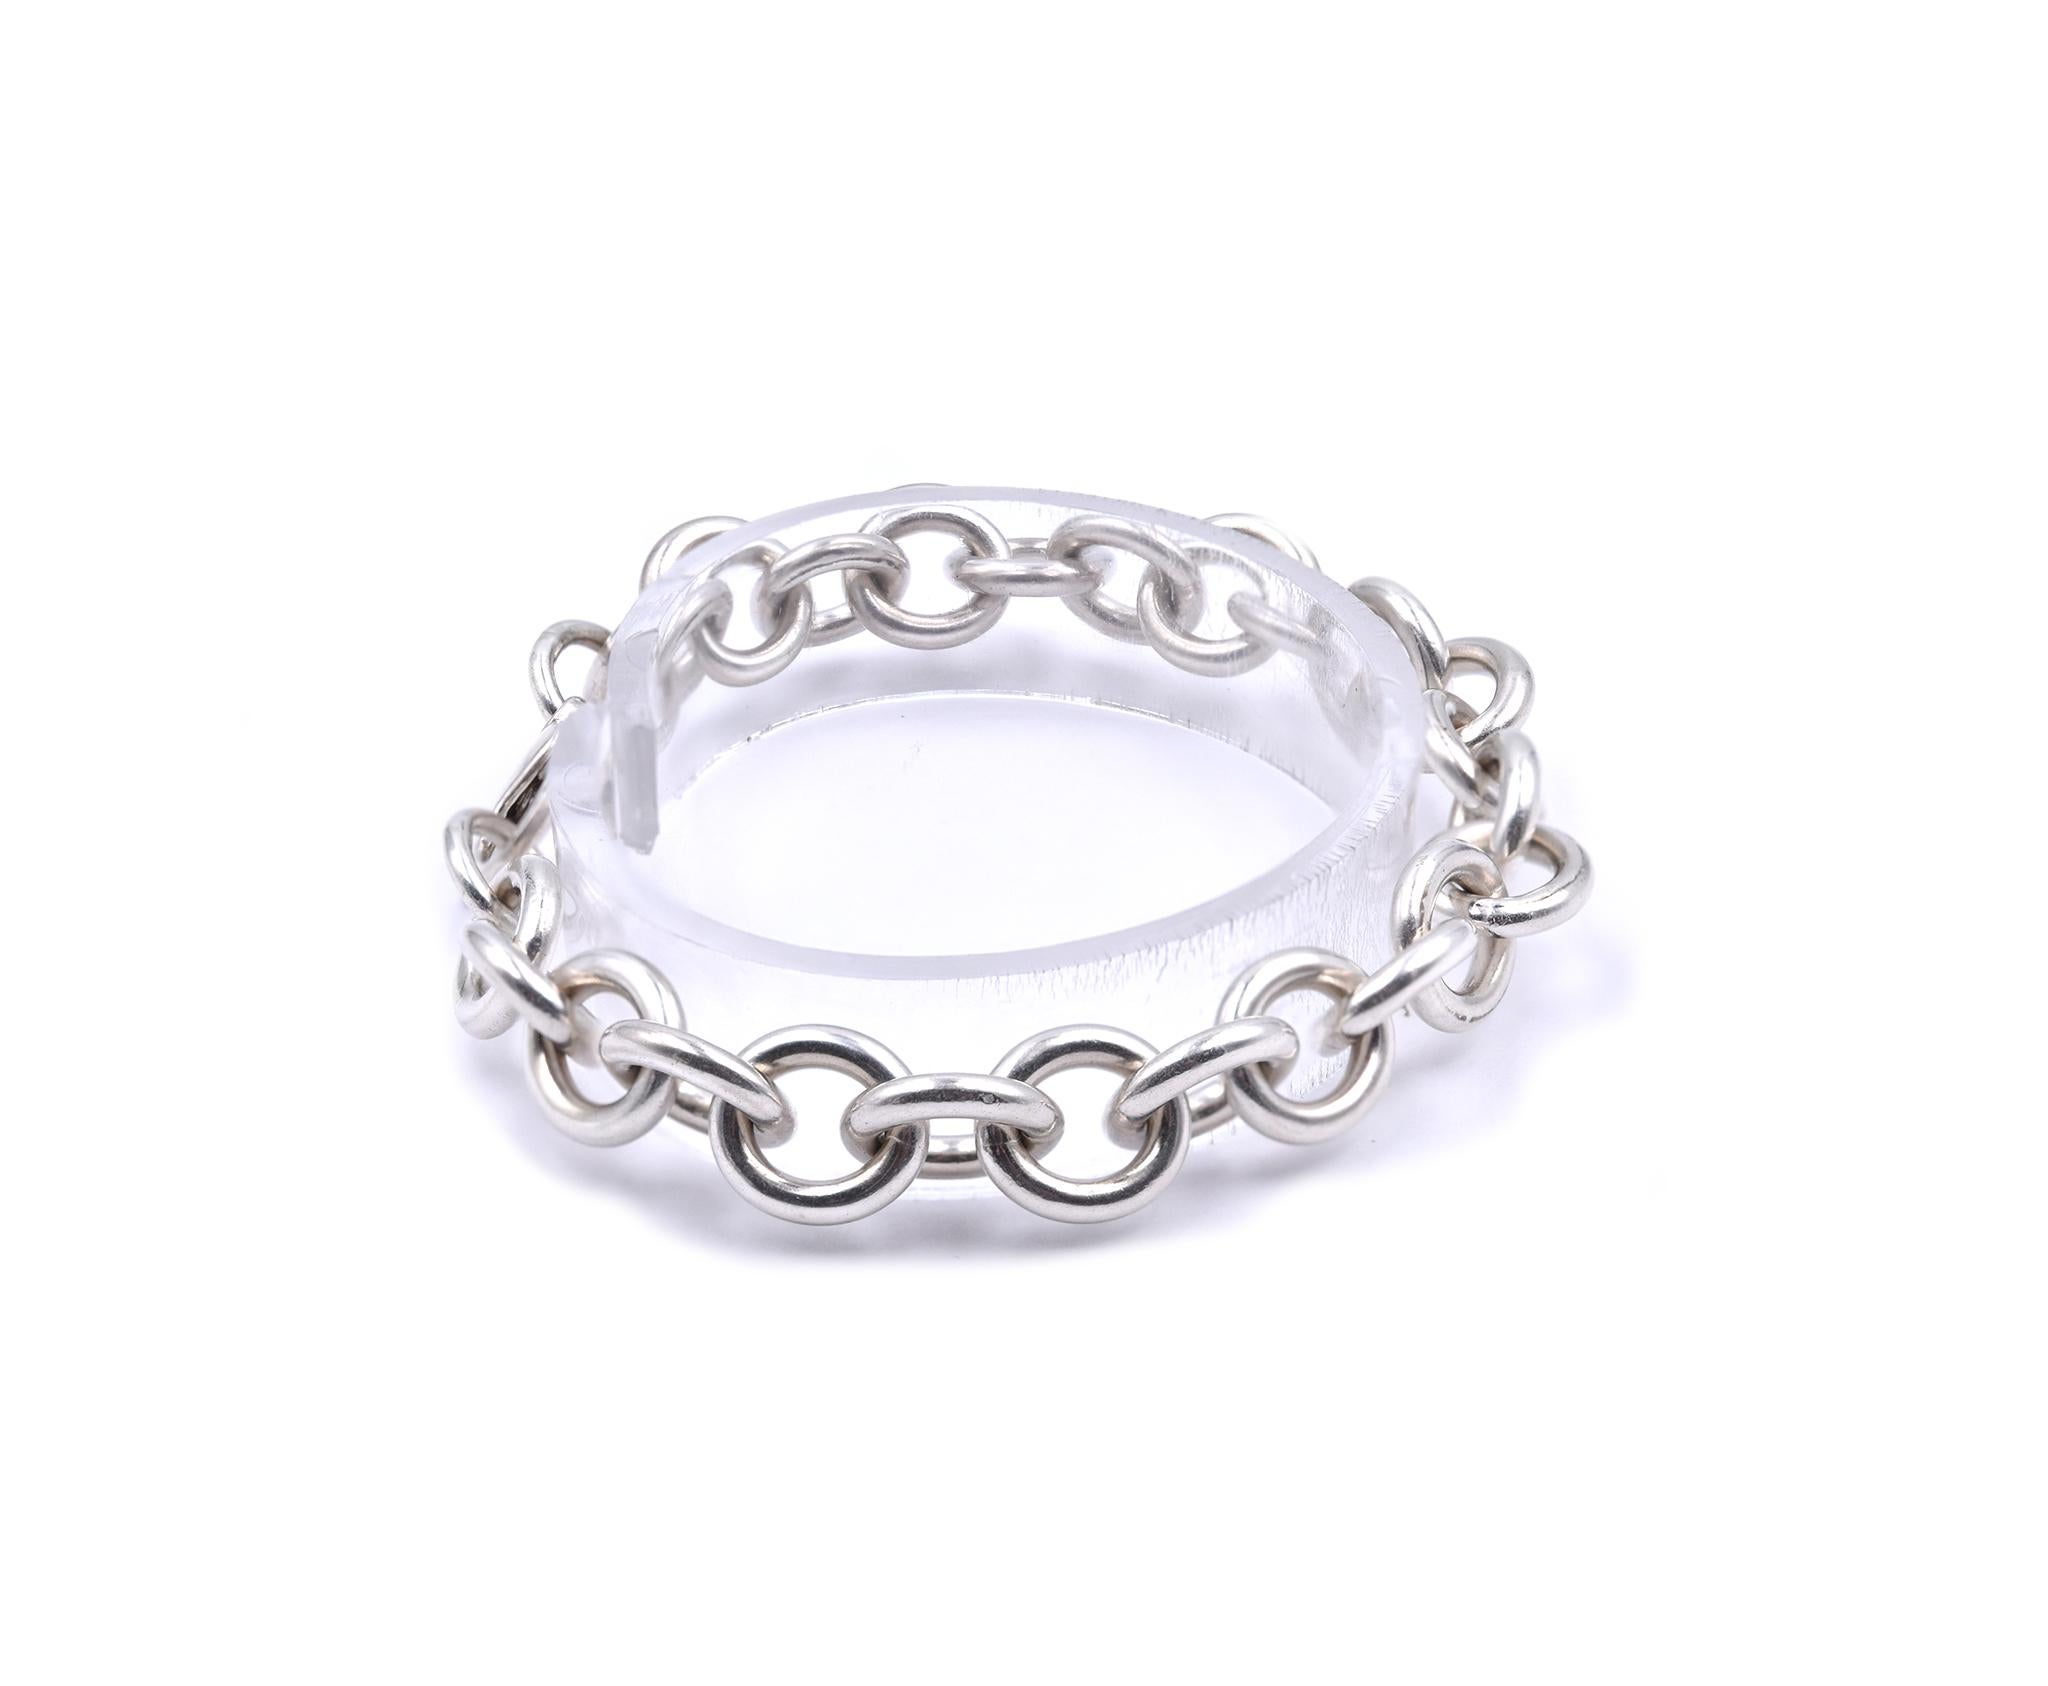 Designer: Tiffany & Co. 
Material: sterling silver
Dimensions: bracelet will fit up to a 7.25-inch wrist
Weight: 28.04 grams
